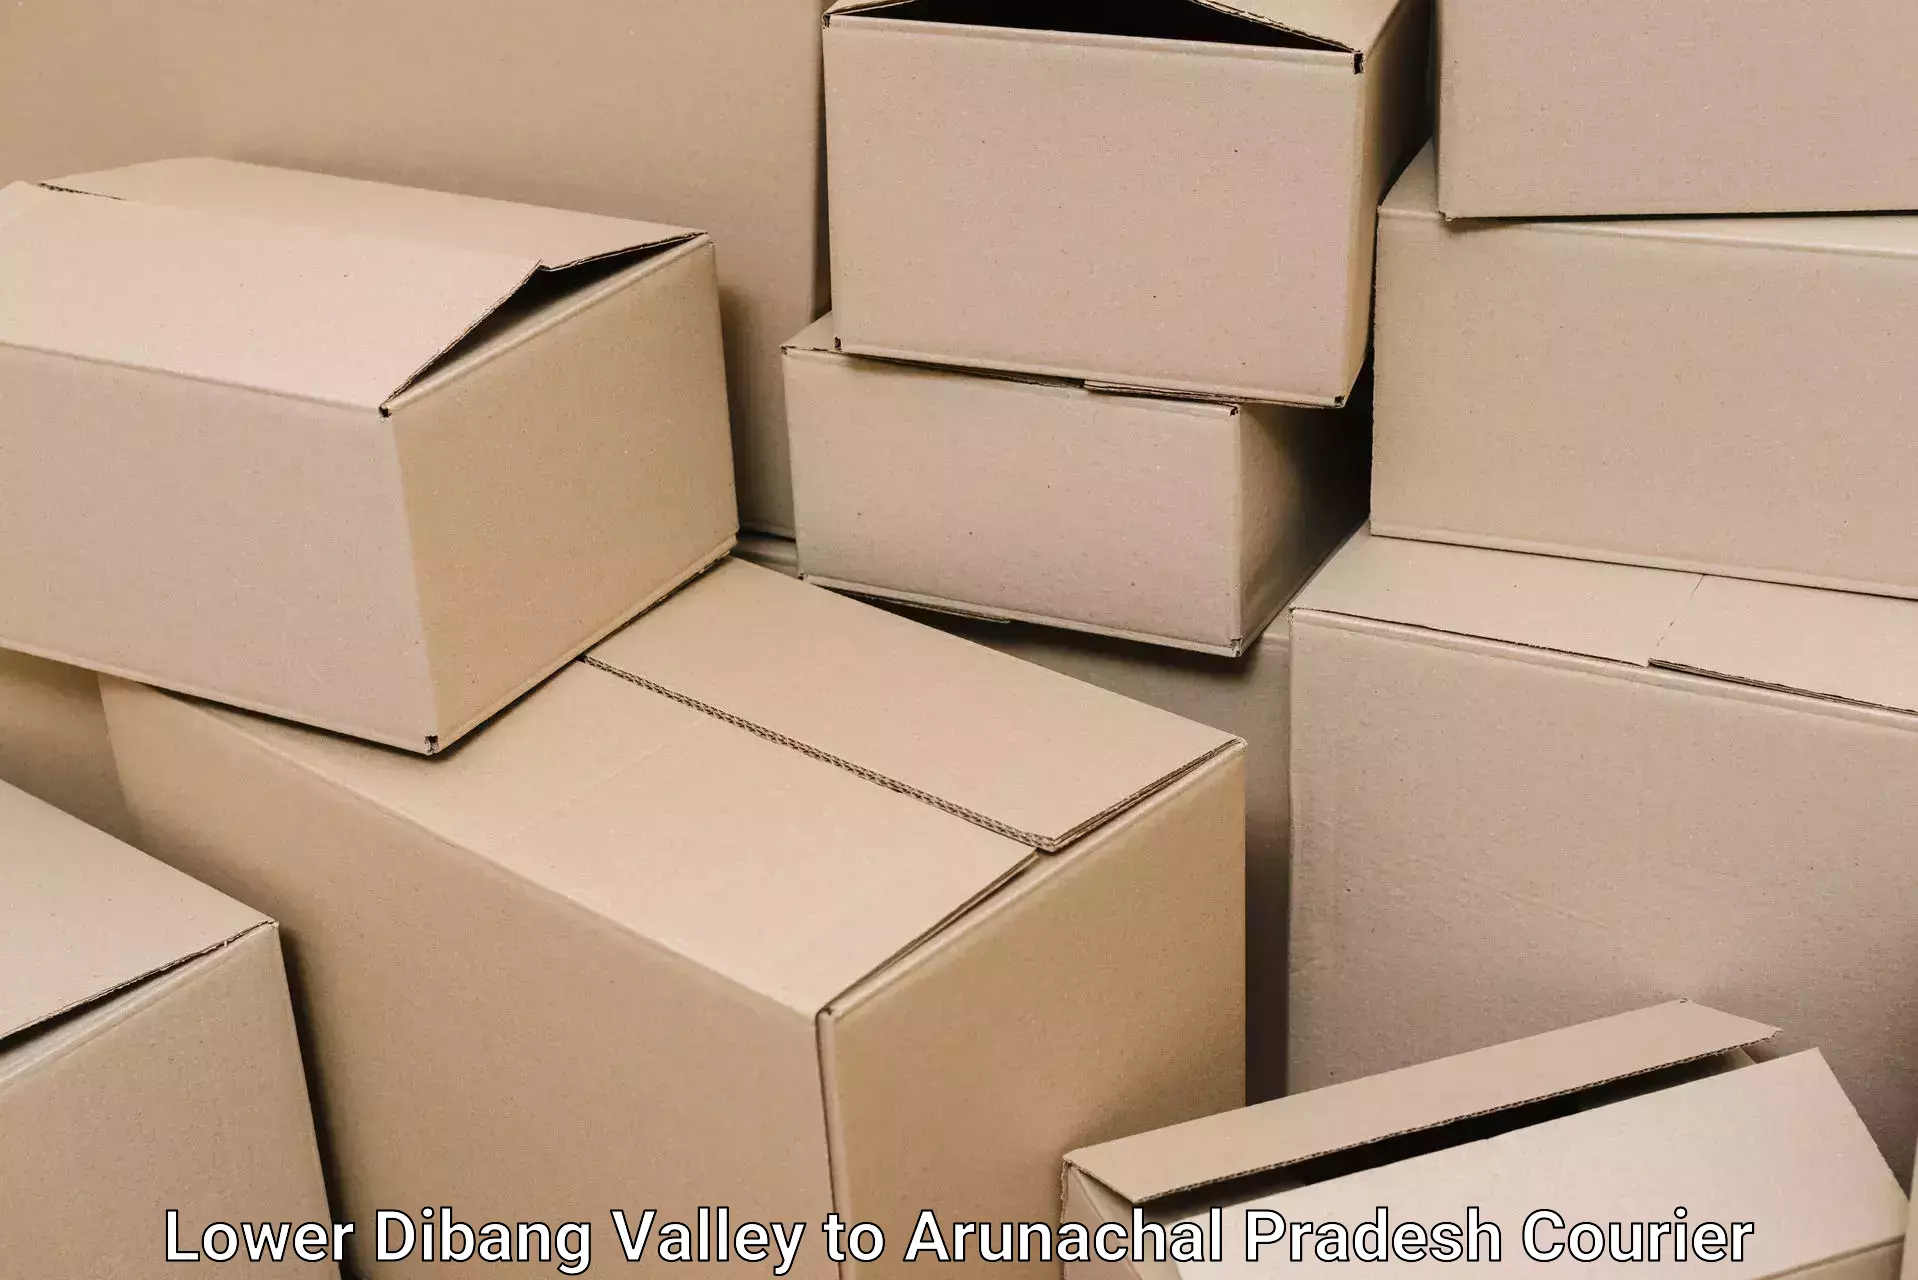 Trusted relocation experts Lower Dibang Valley to Itanagar